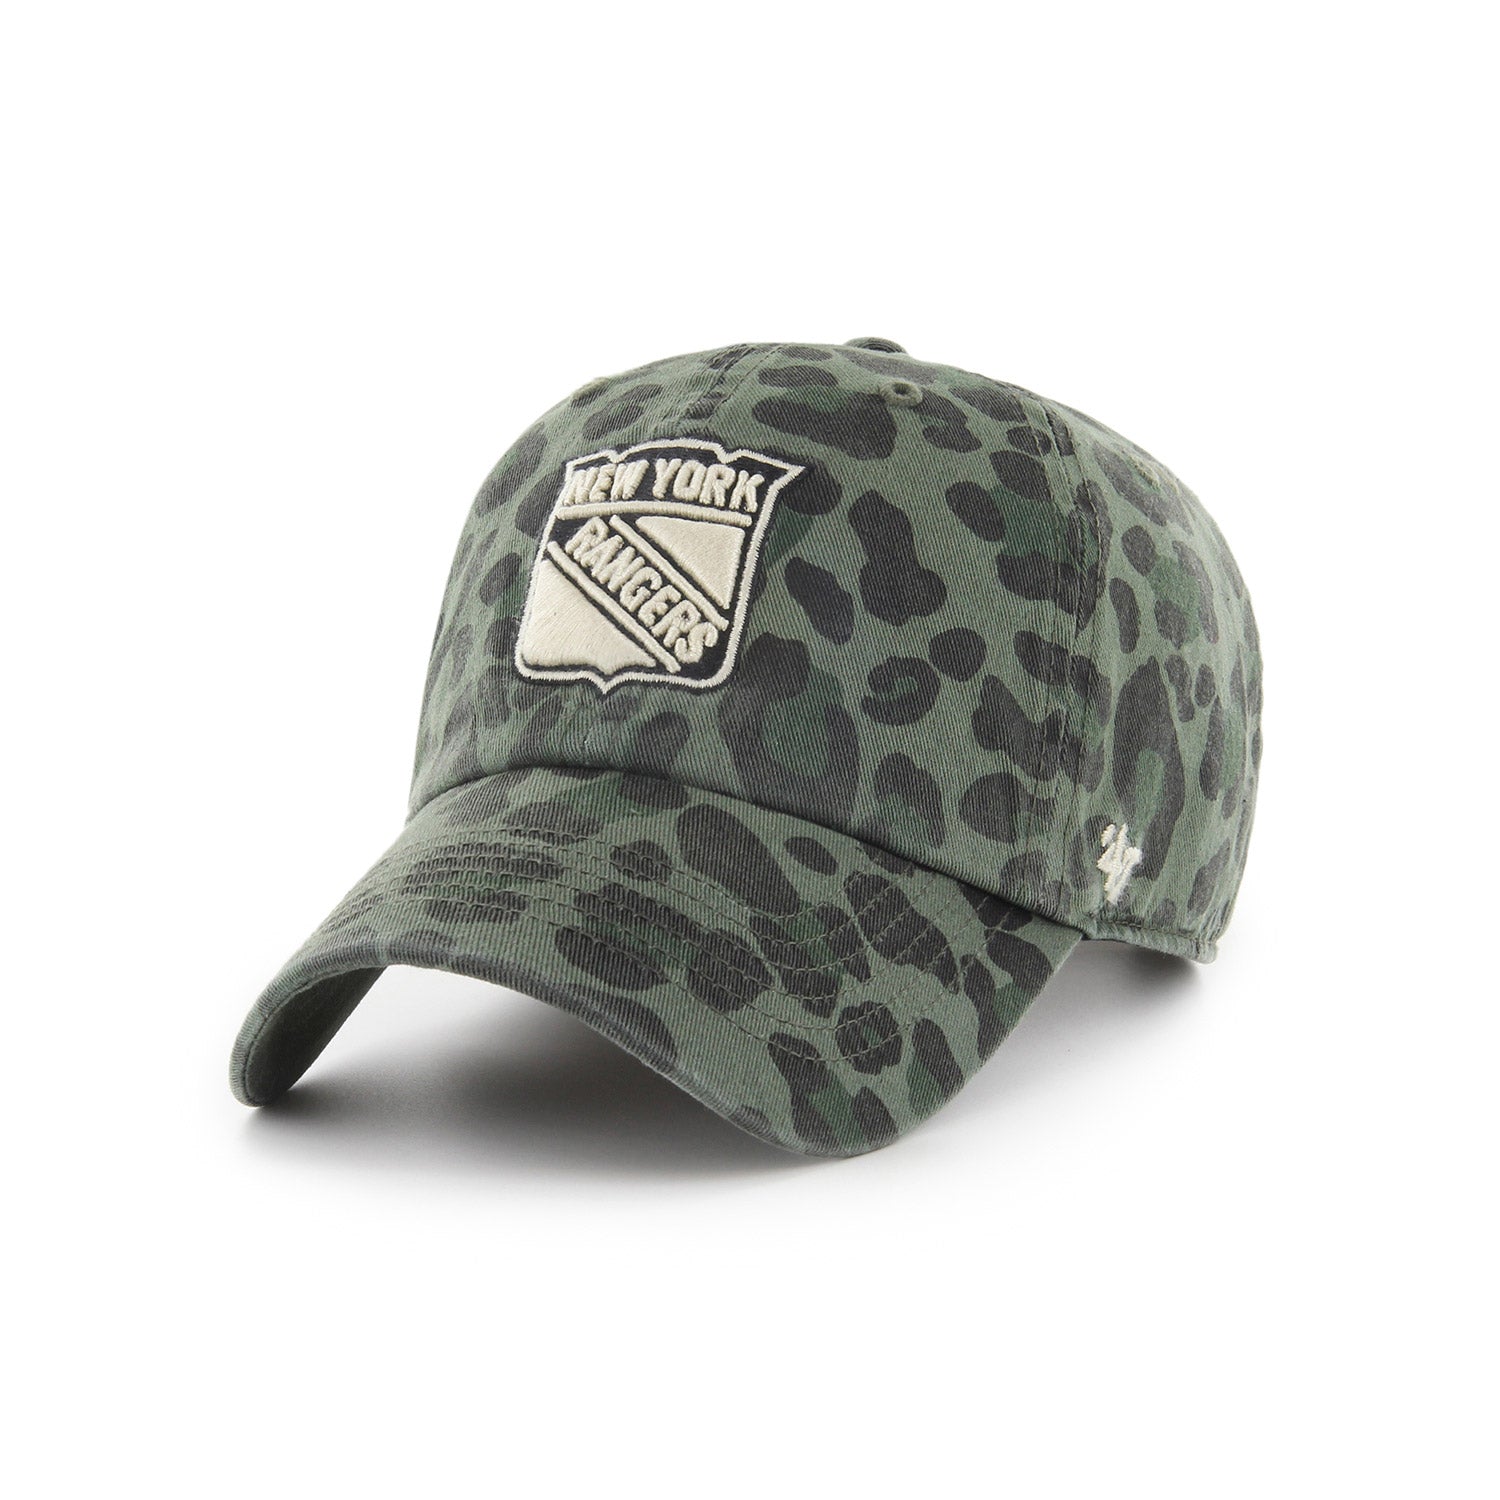 Women's '47 Brand Rangers Bagheera Camo Clean Up Hat In Green & Black - Angled Left Side View